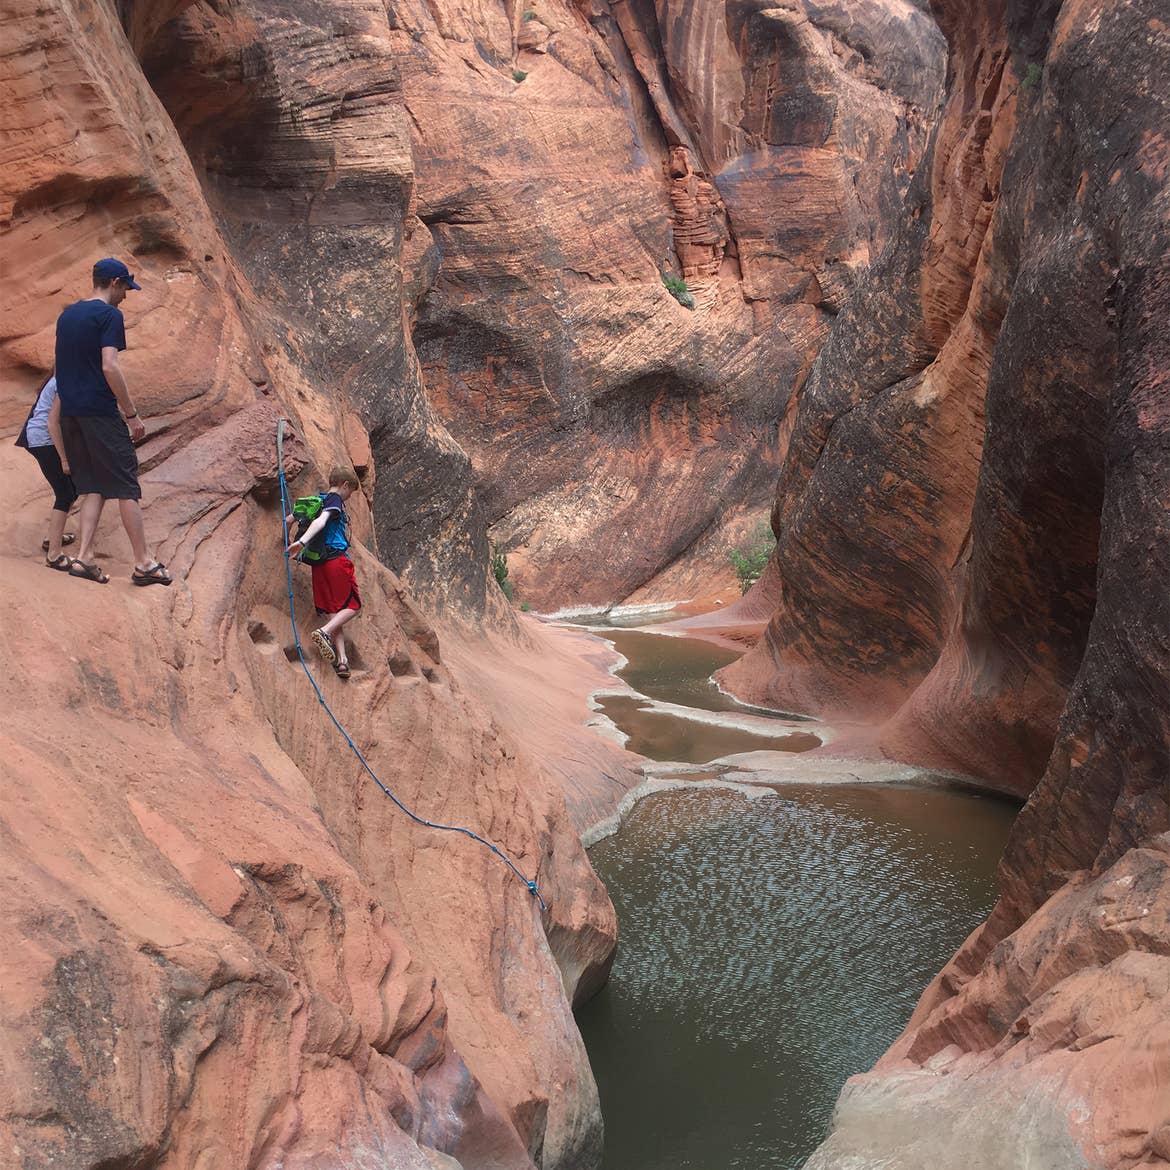 A many and two young boys wearing basketball shorts, sandals and backpacks walk on a rock formation trail on orange rocks at Zion National Park near a ravine.